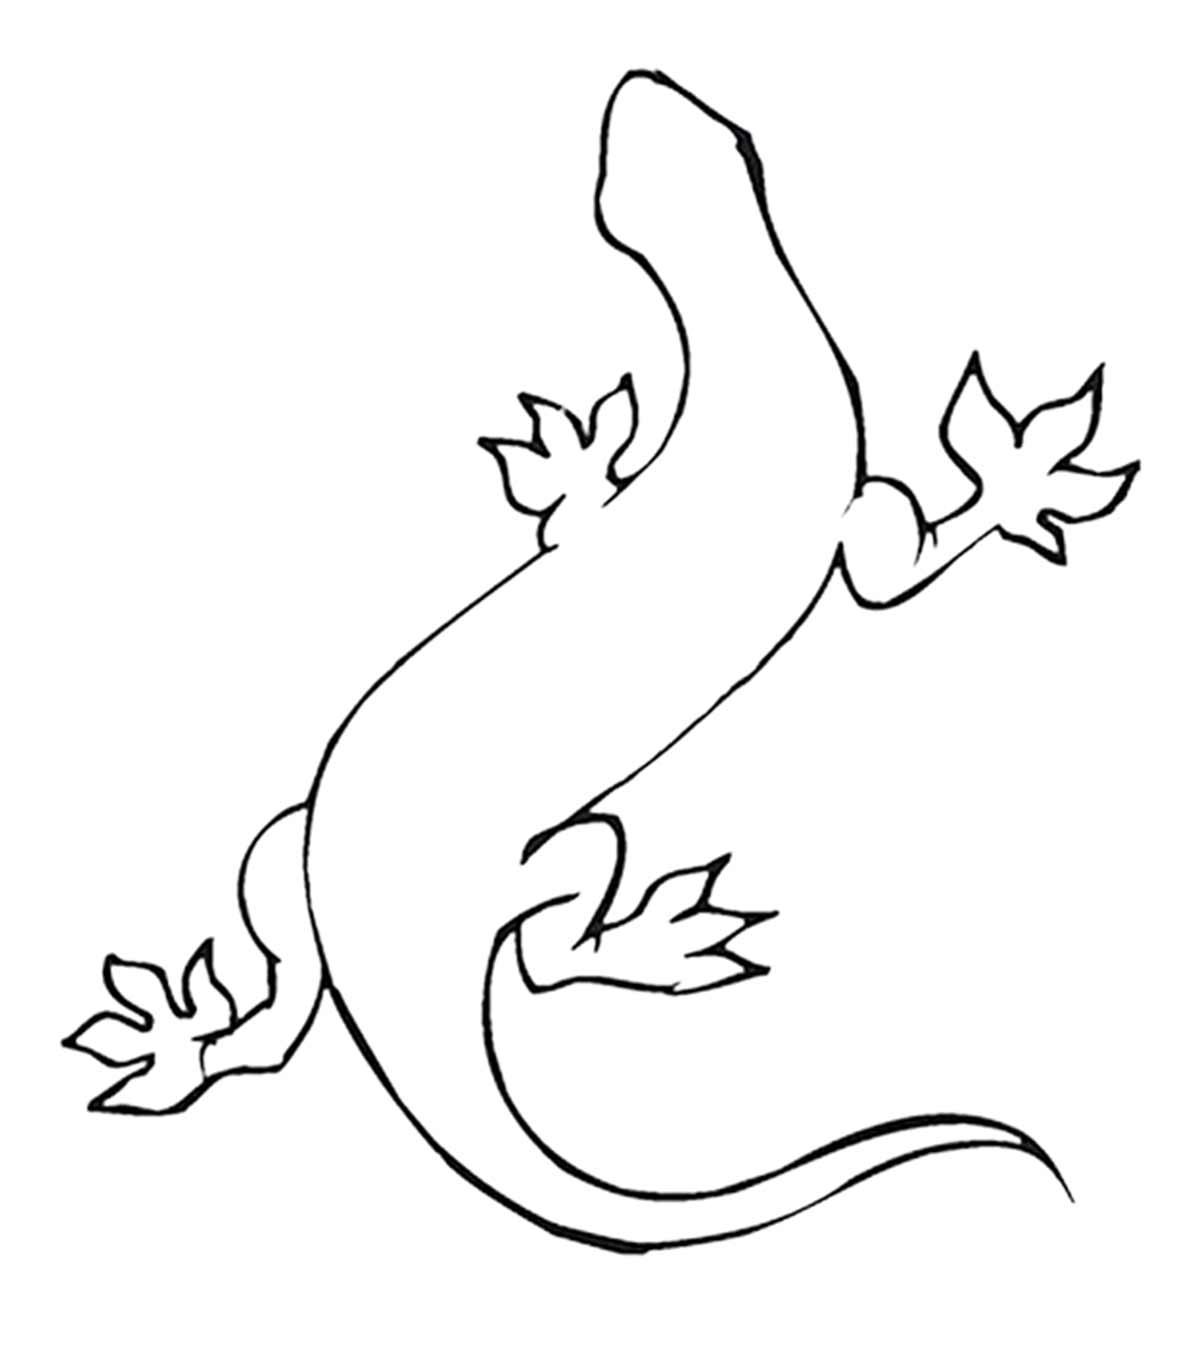 Top 10 Lizard Coloring Pages For Your Little Ones_image